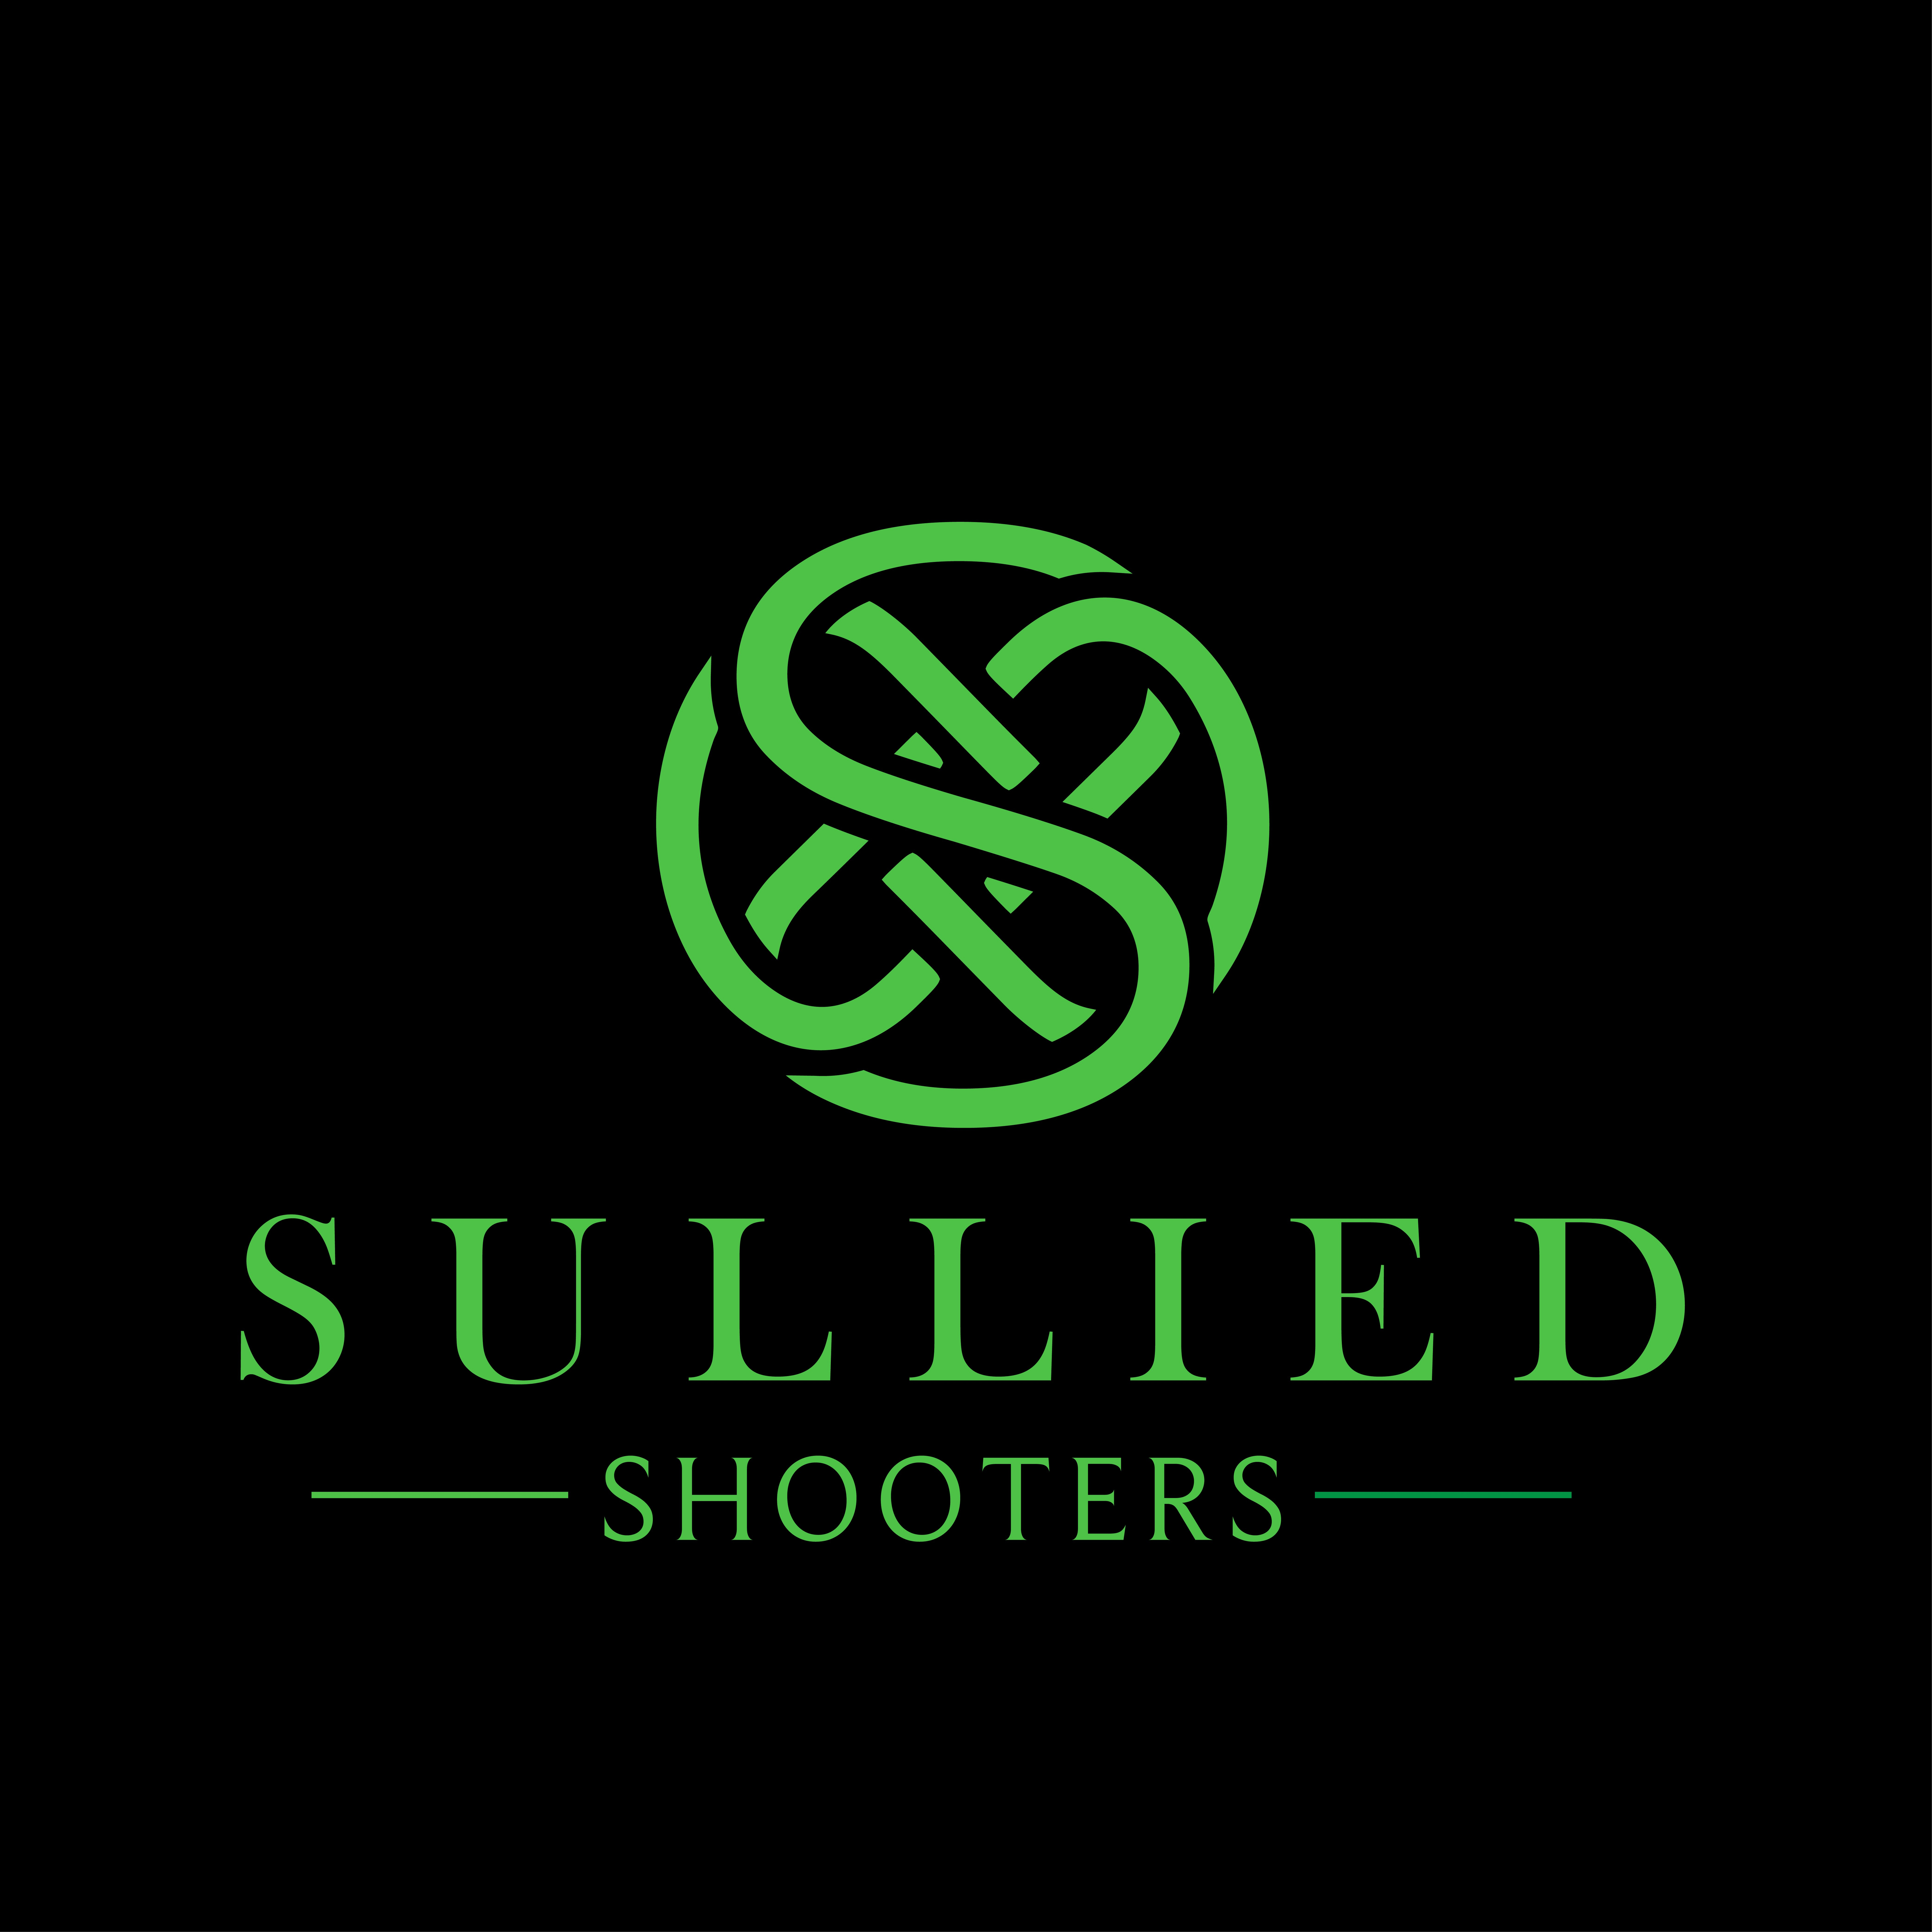  SULLIED SHOOTERS